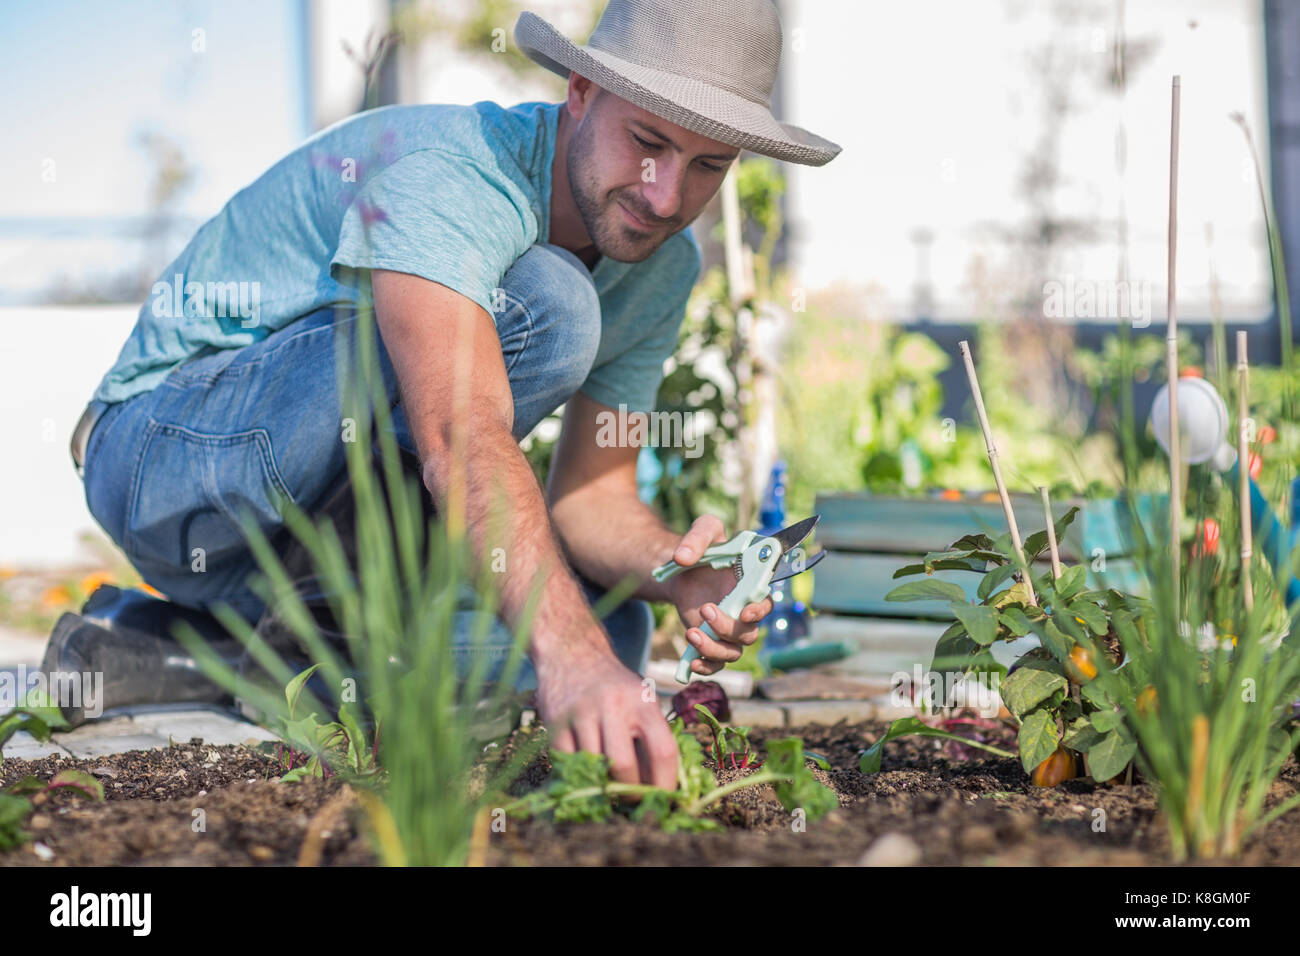 Young Man Tending To Plants In Garden Stock Photo 160177487 Alamy